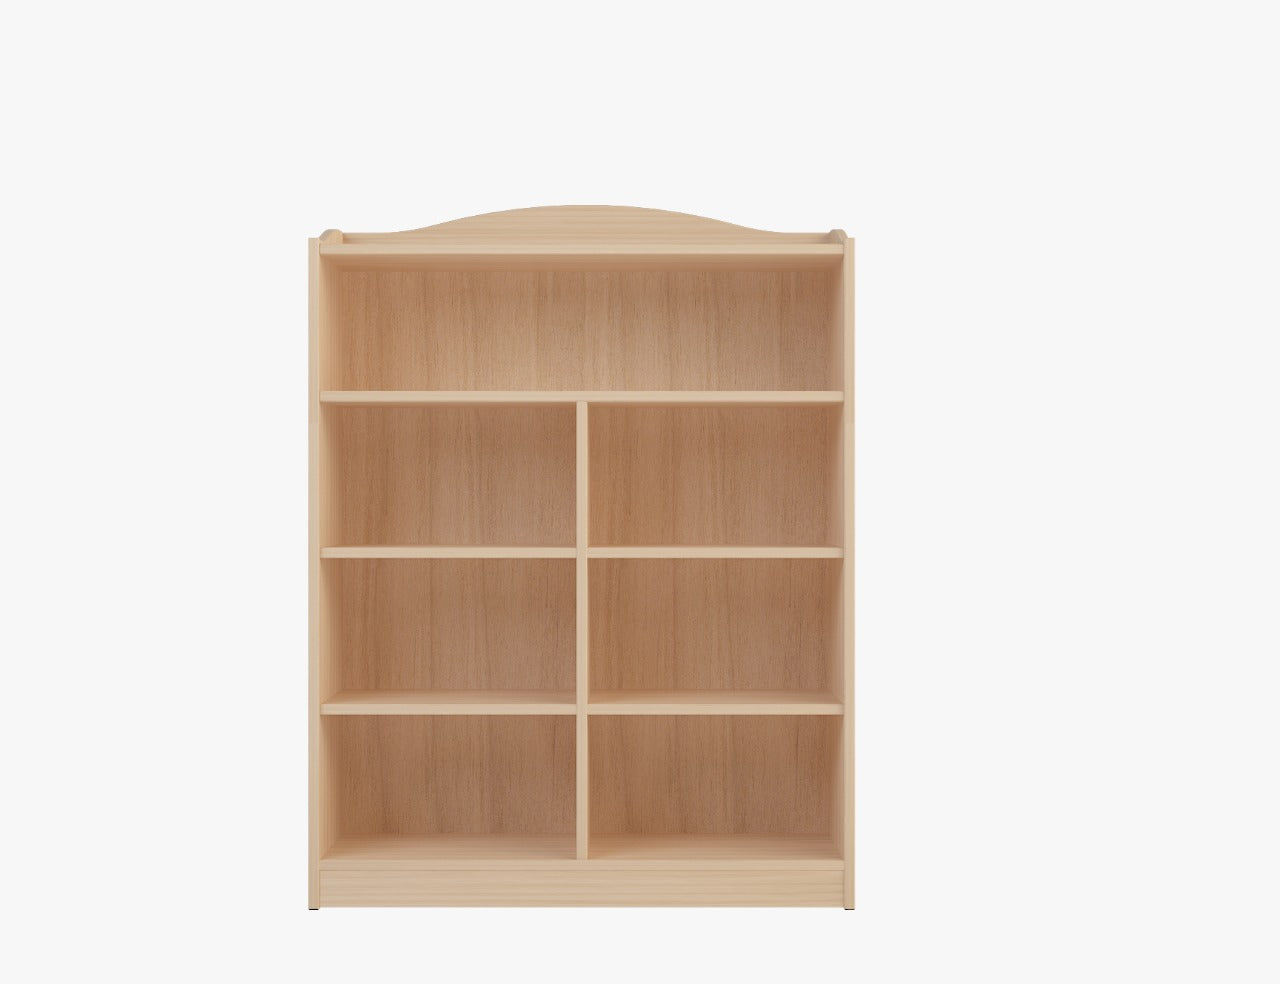 Deluxe Wood Bookcase